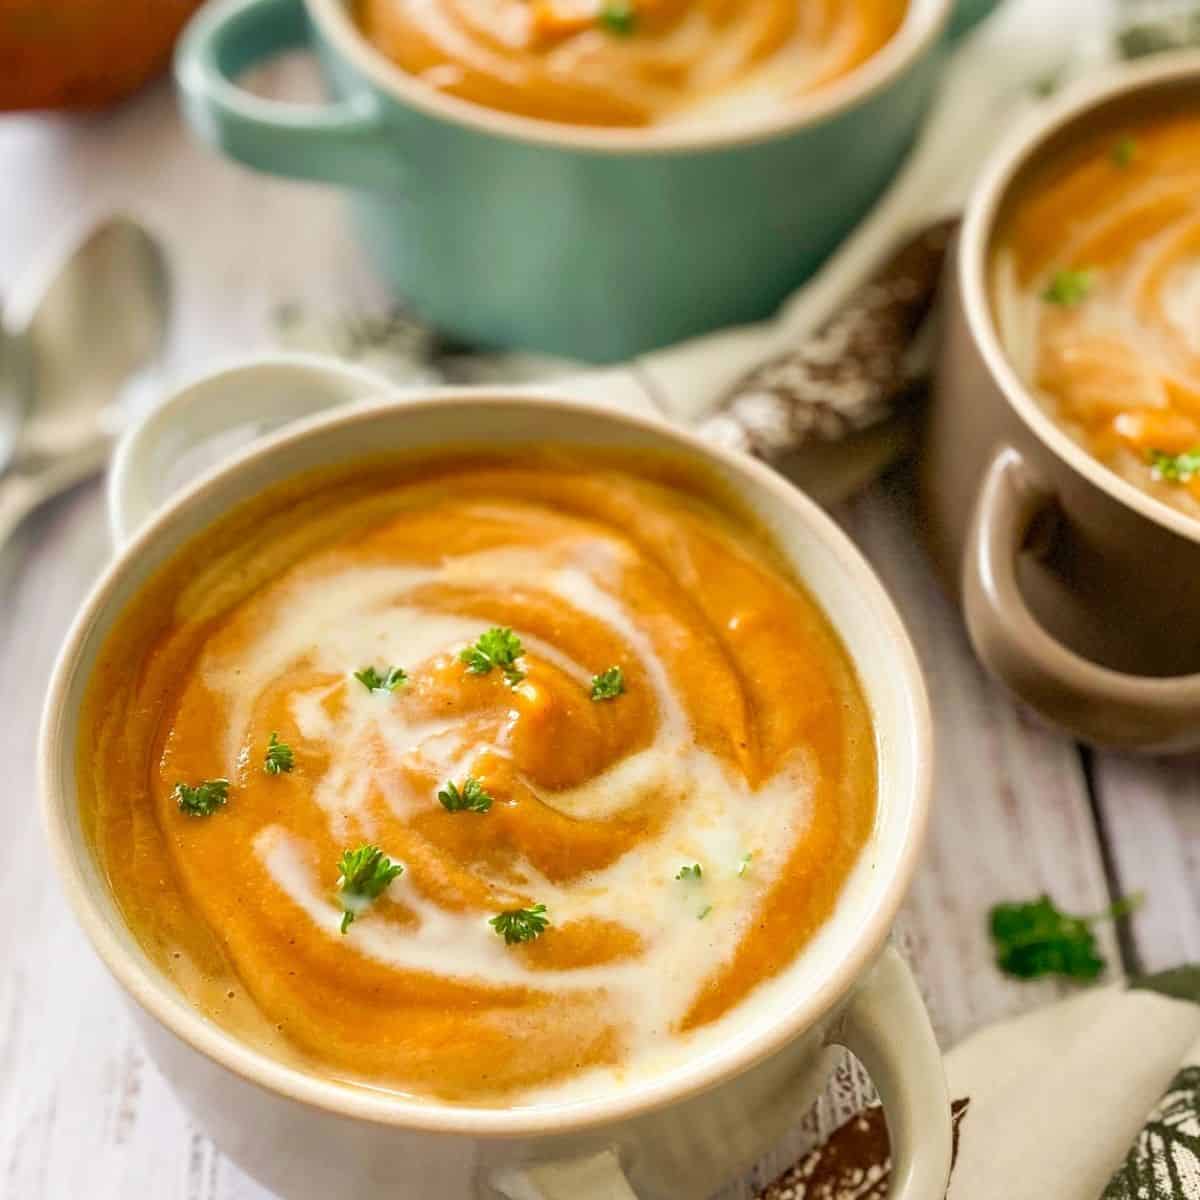 bowls of sweet potato soup garnished with fresh parsley.